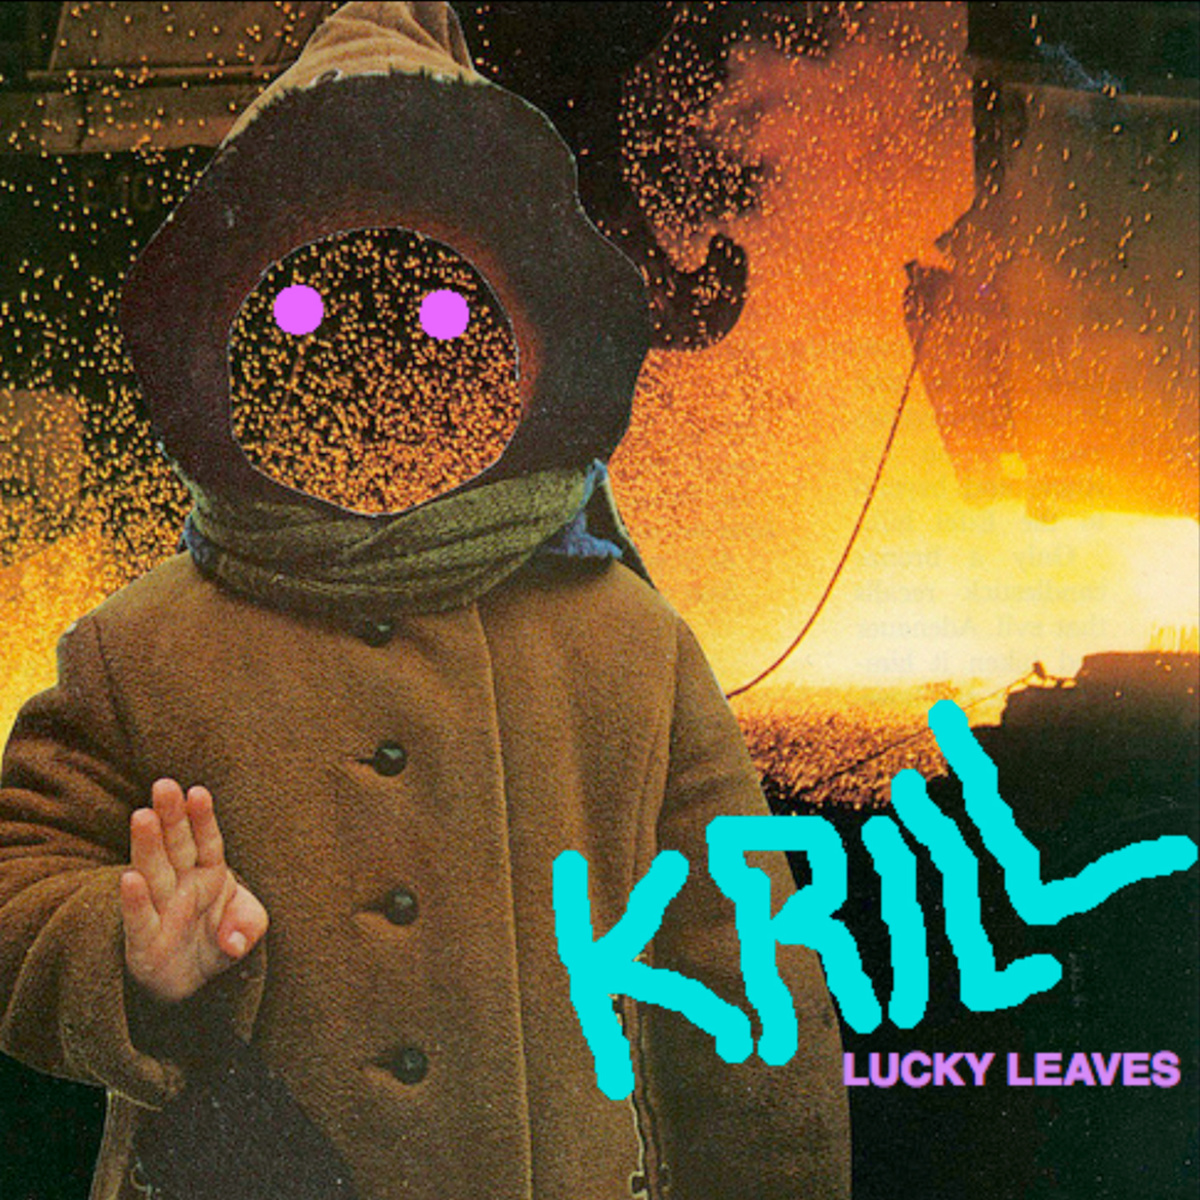 Krill - Lucky Leaves